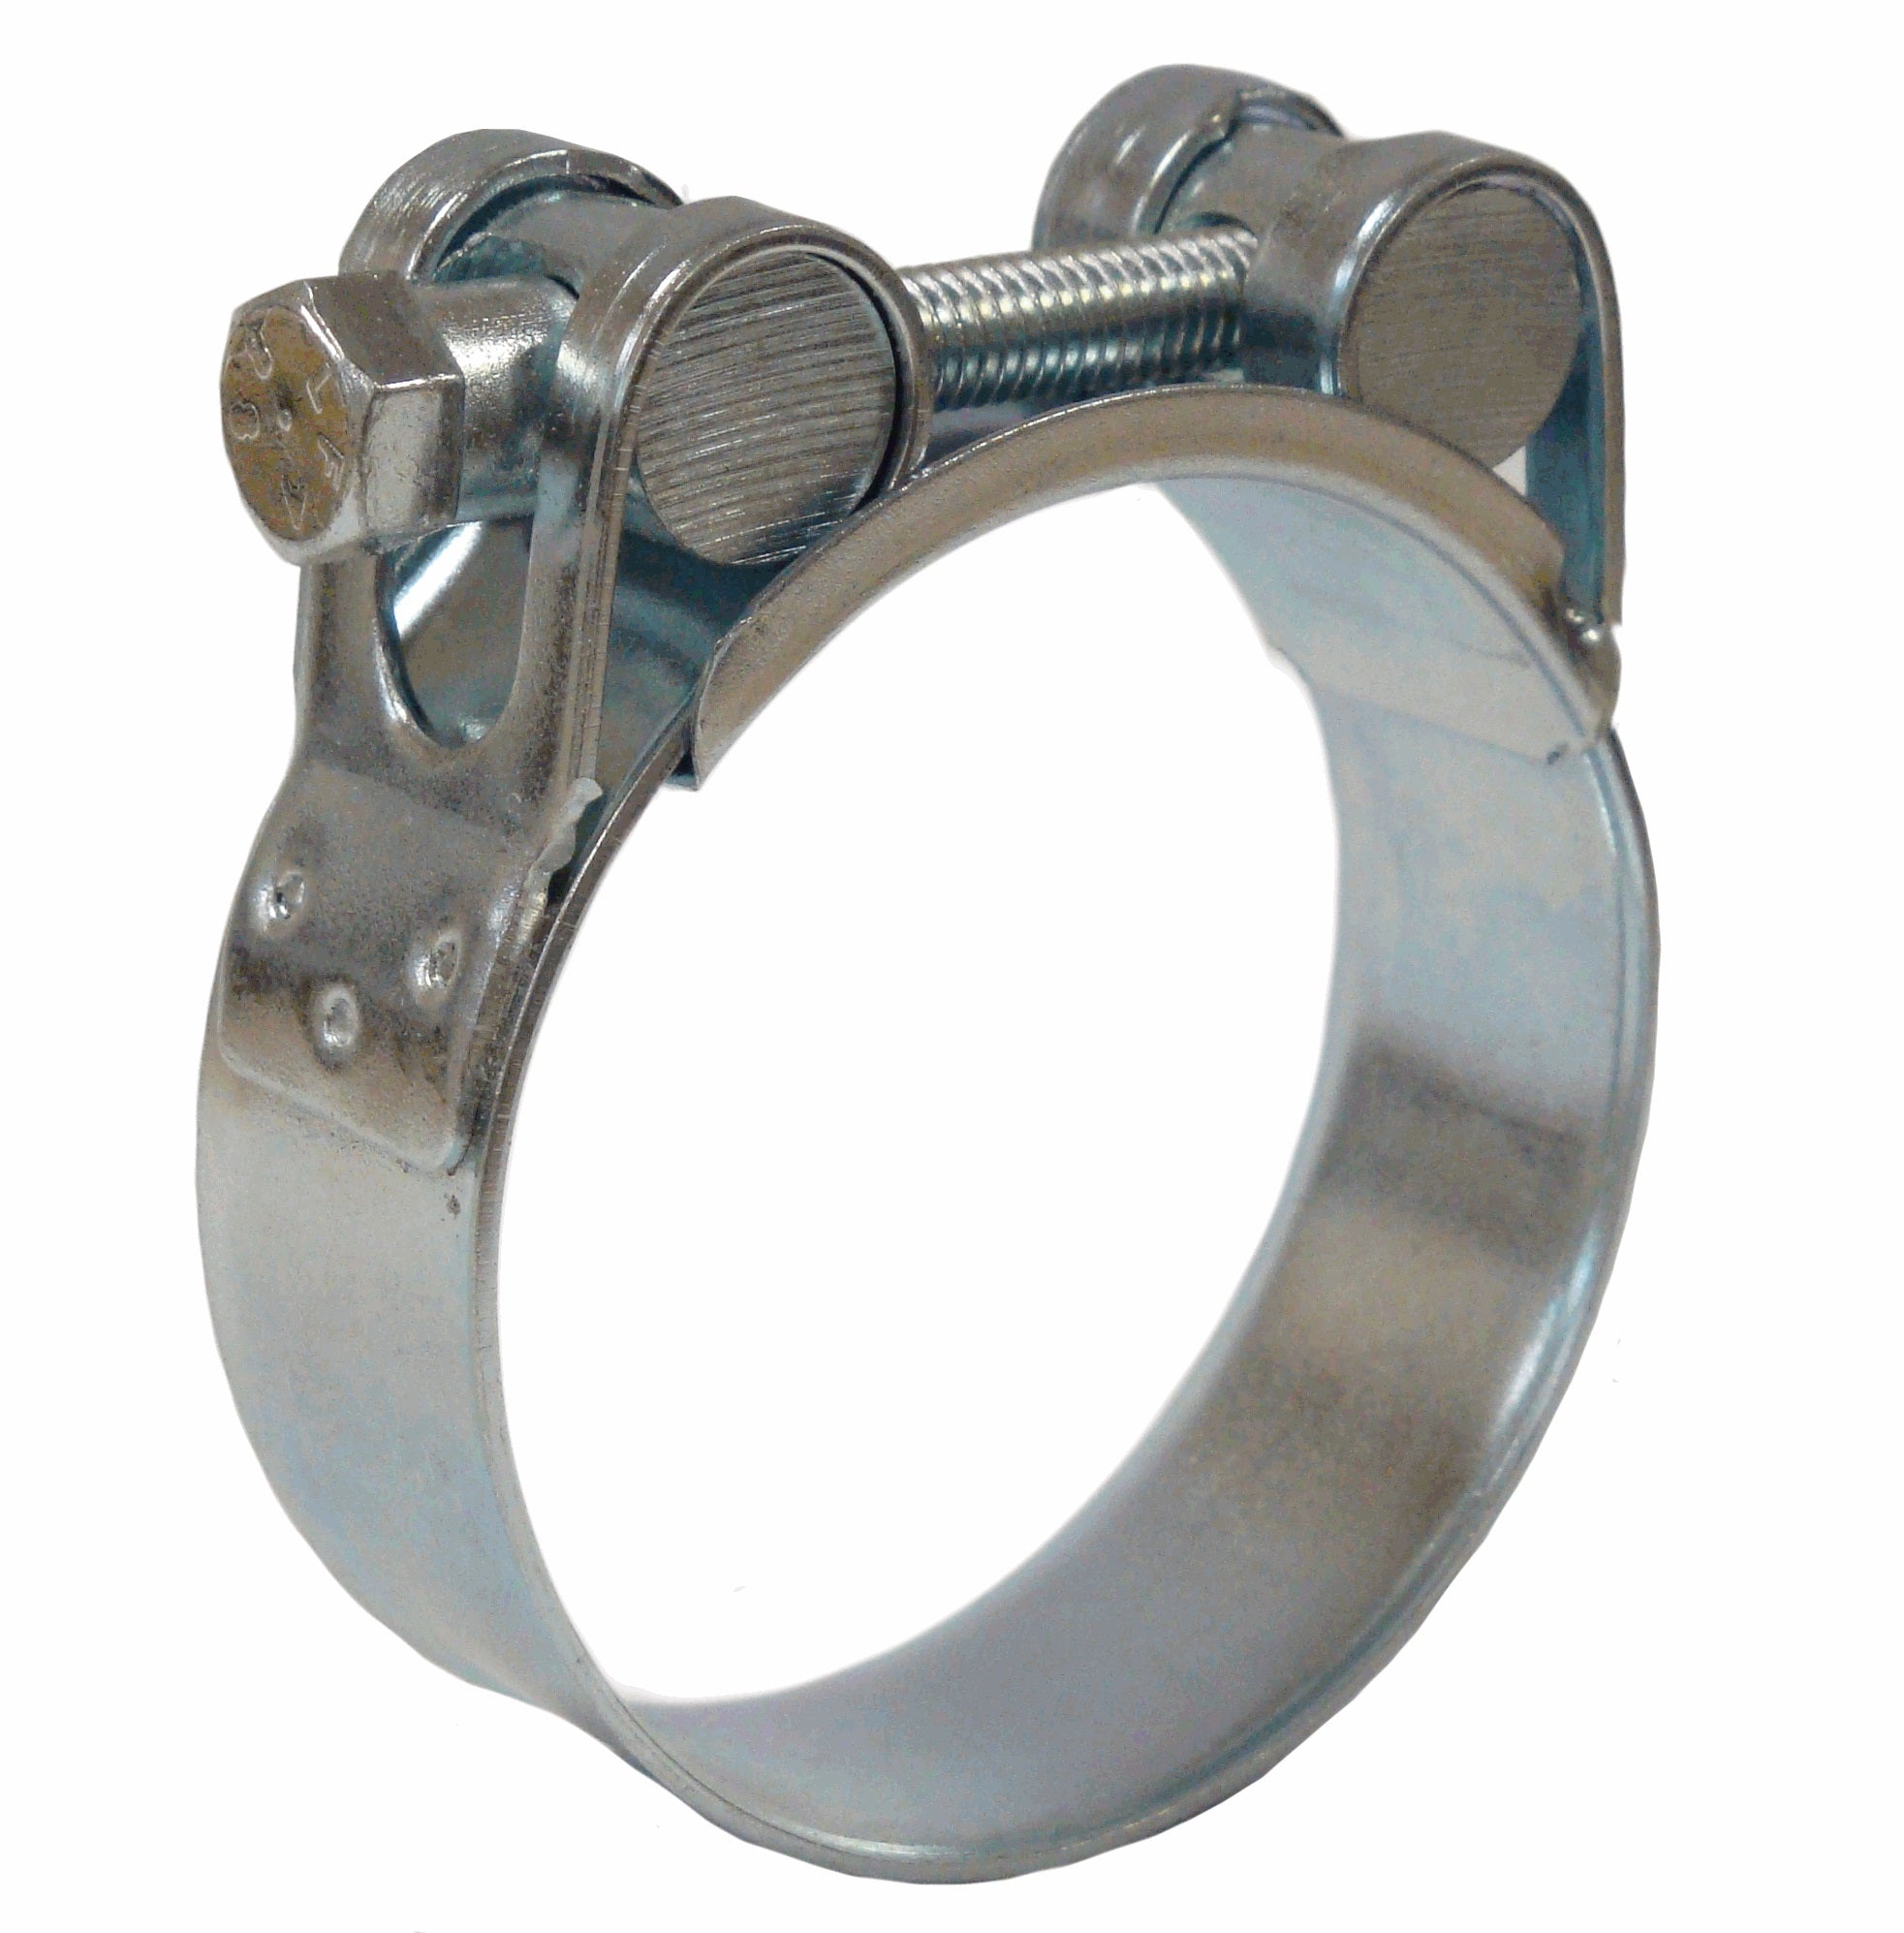 Jubilee® Superclamp 214-226mm 316 Stainless Steel